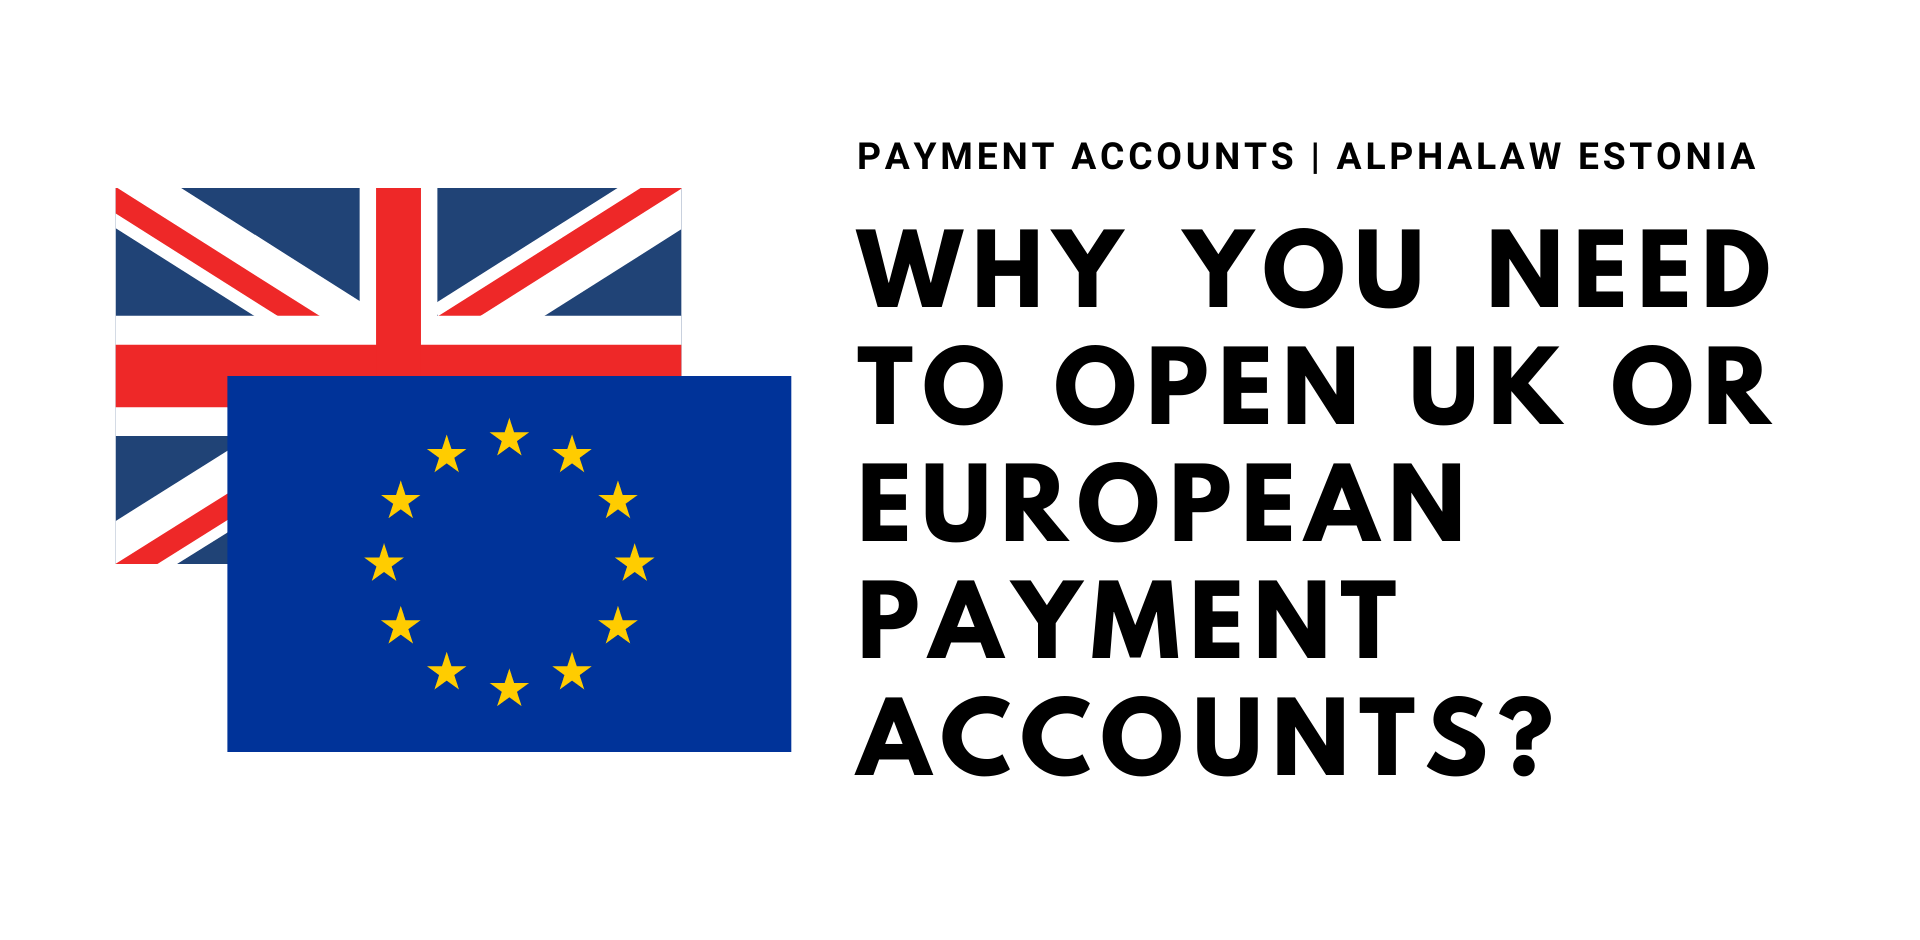 Why You Need To Open UK or European Payment Accounts?